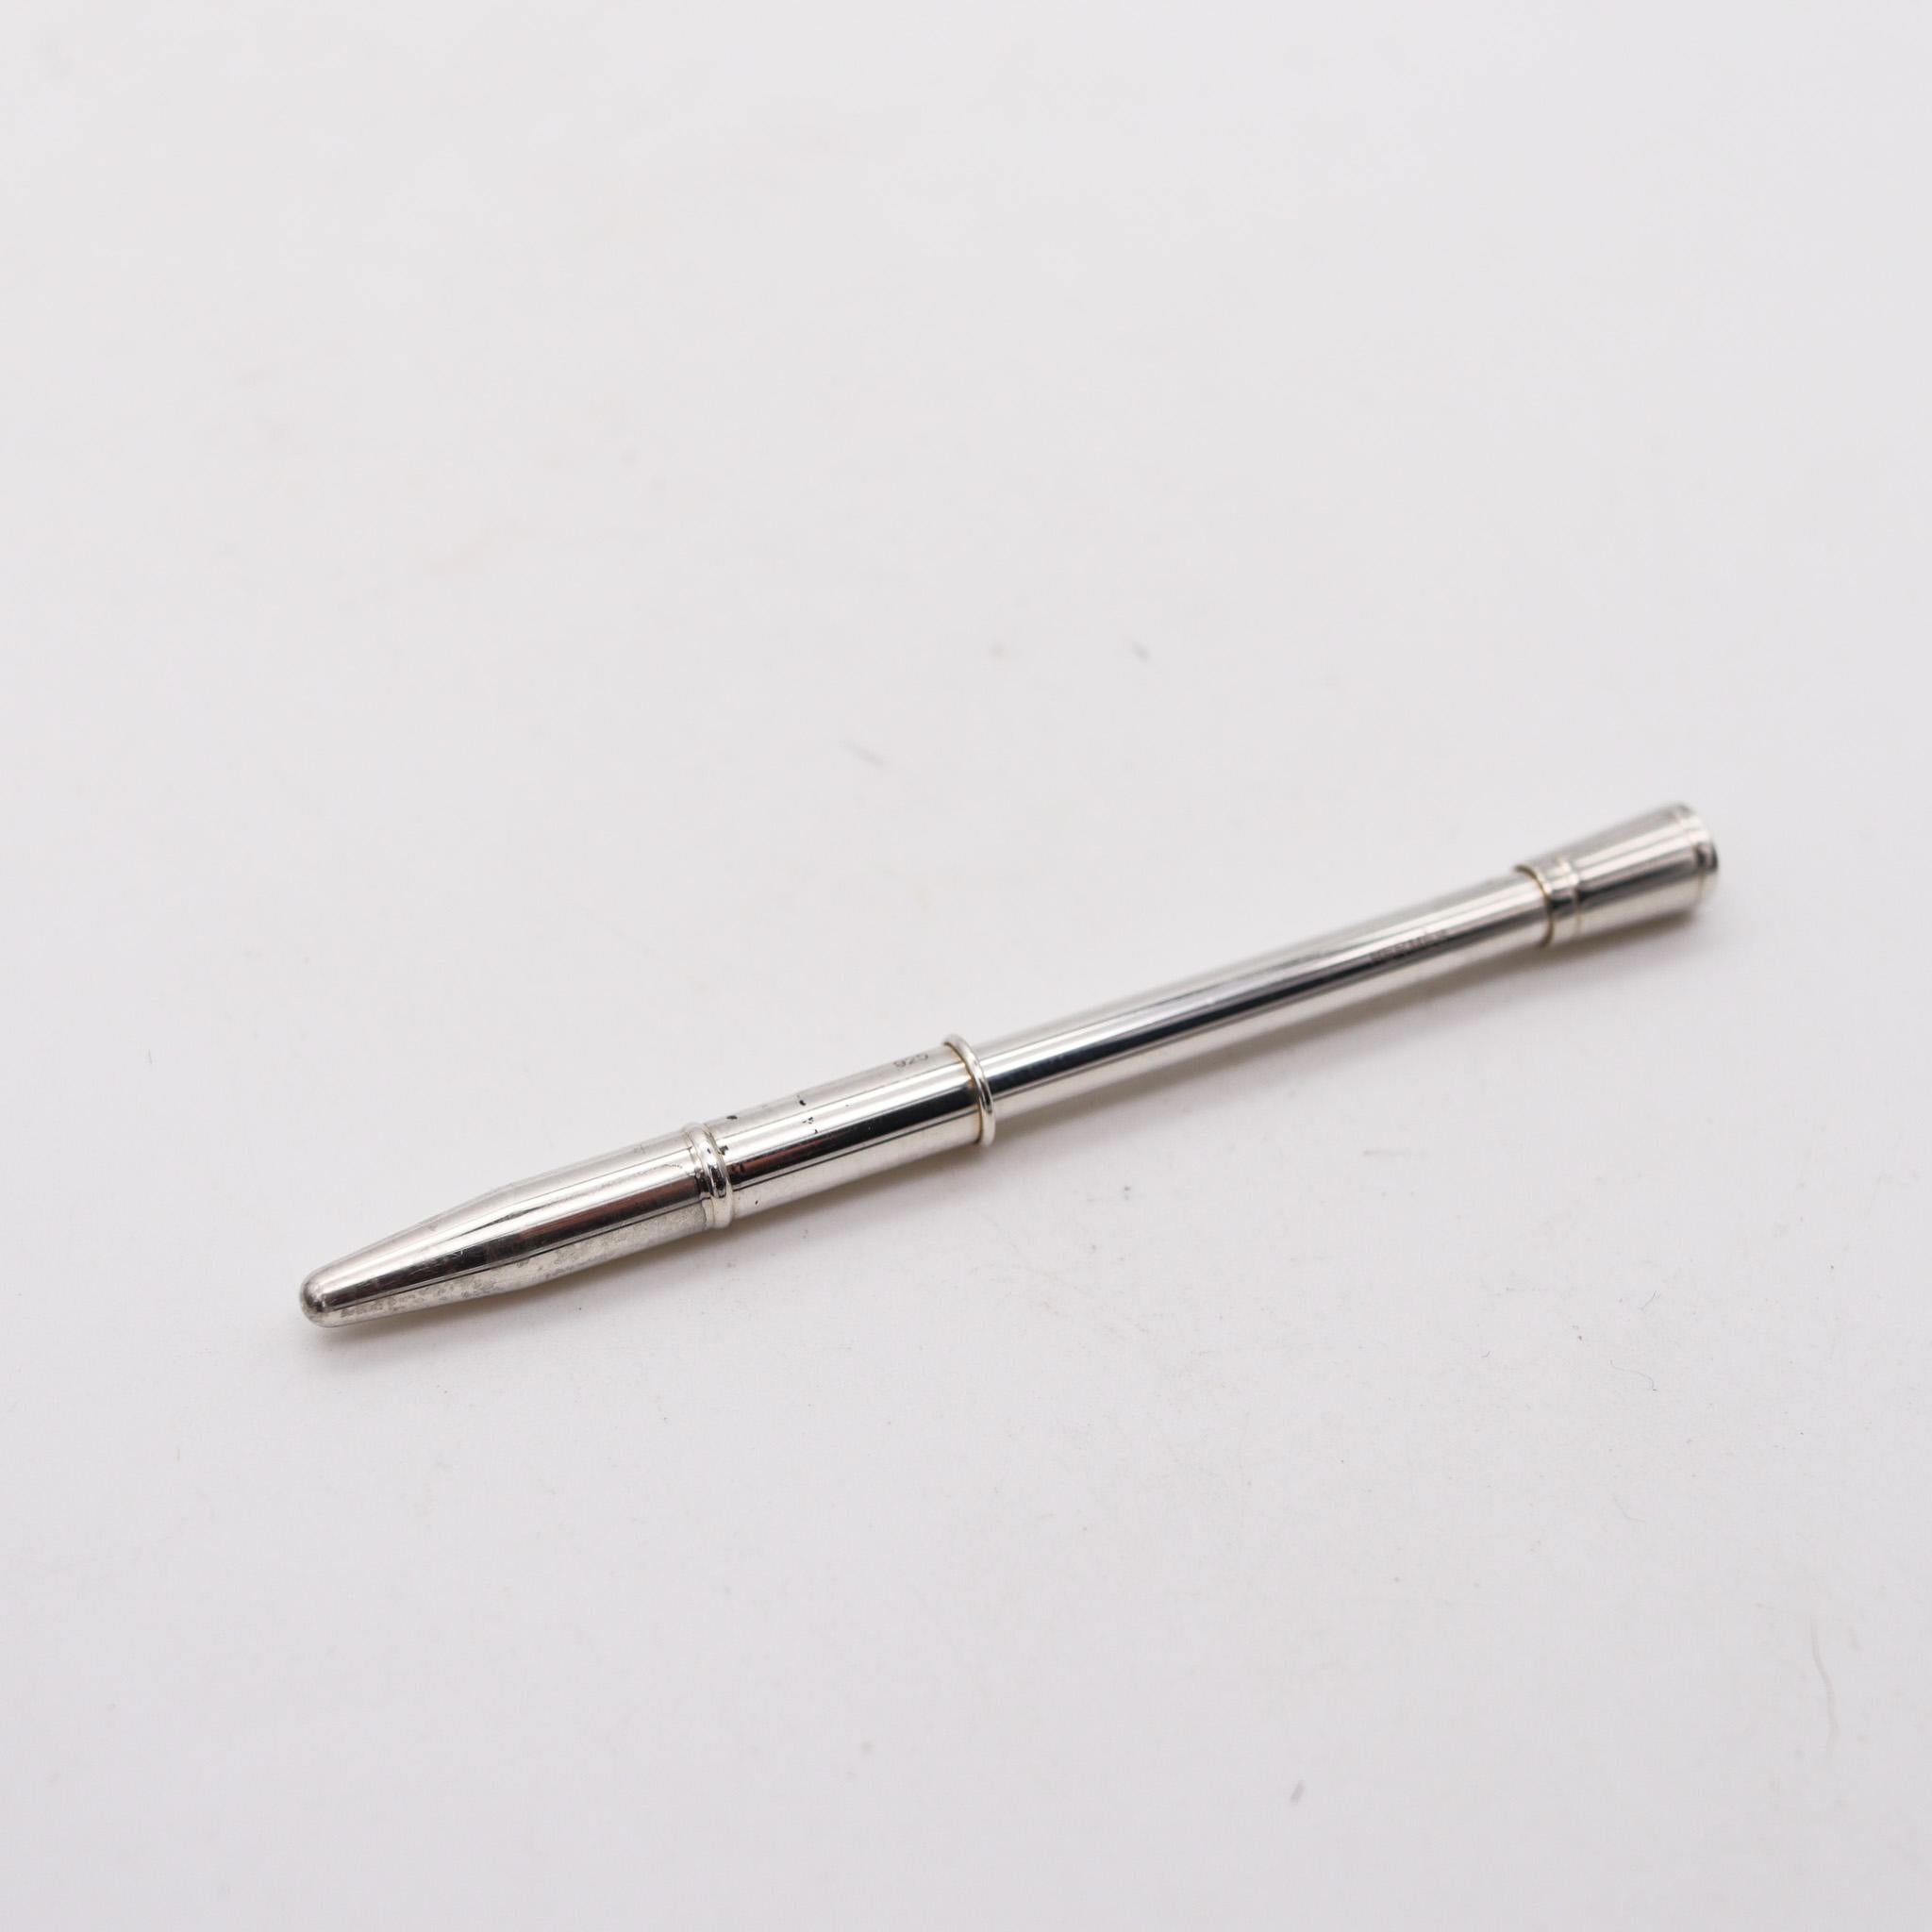 A purse pen designed by Hermes.

Very sleek and useful purse pen, created in Paris France by the luxury house of Hermes, back in the 1970. It was crafted with slim modernist geometric patterns in solid .925/.999 sterling silver with high polished